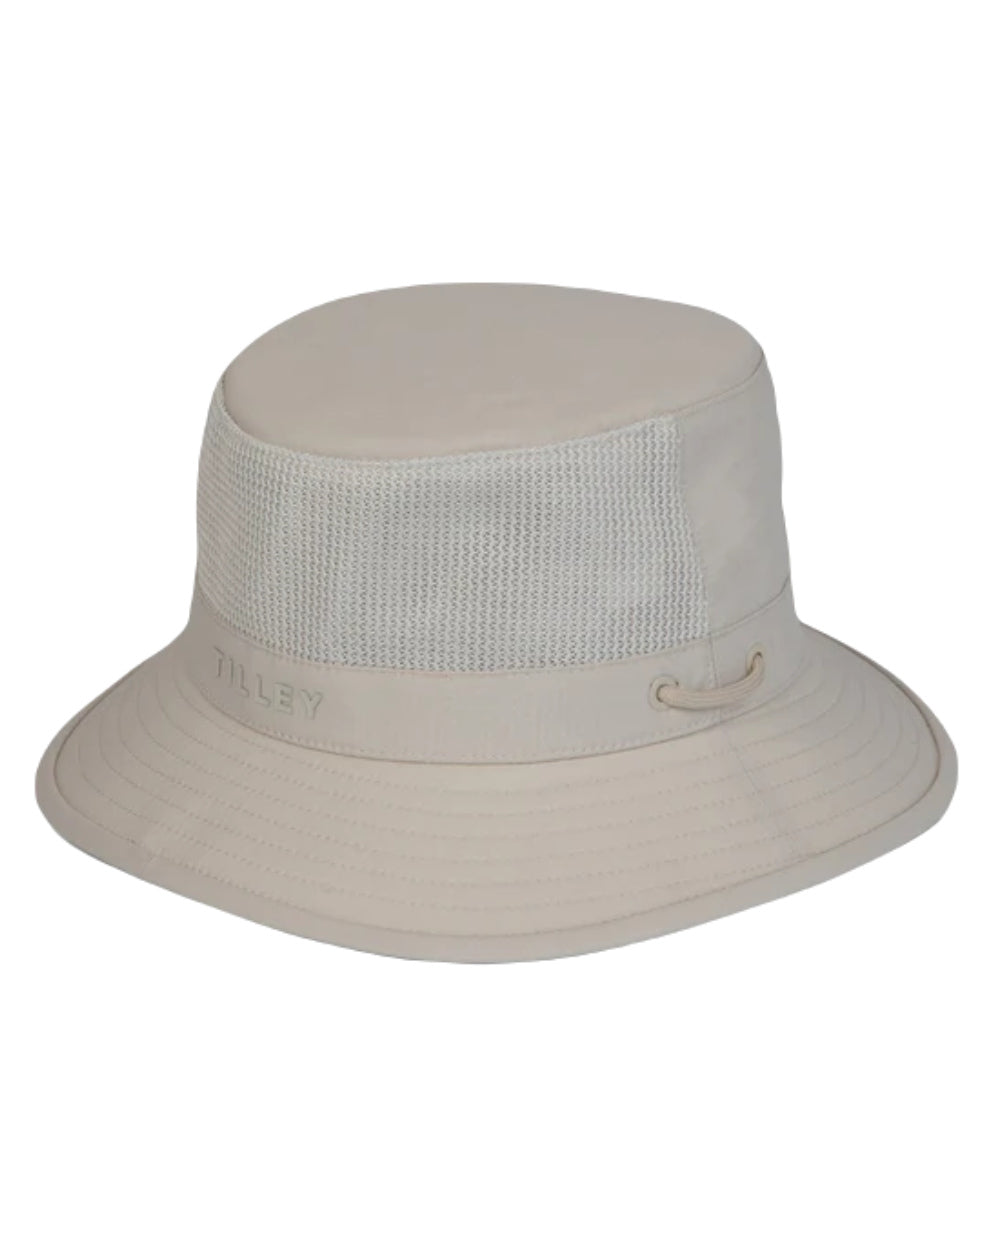 Light Stone Coloured Tilley Hat LTM1 Airflo Bucket On A White Background 